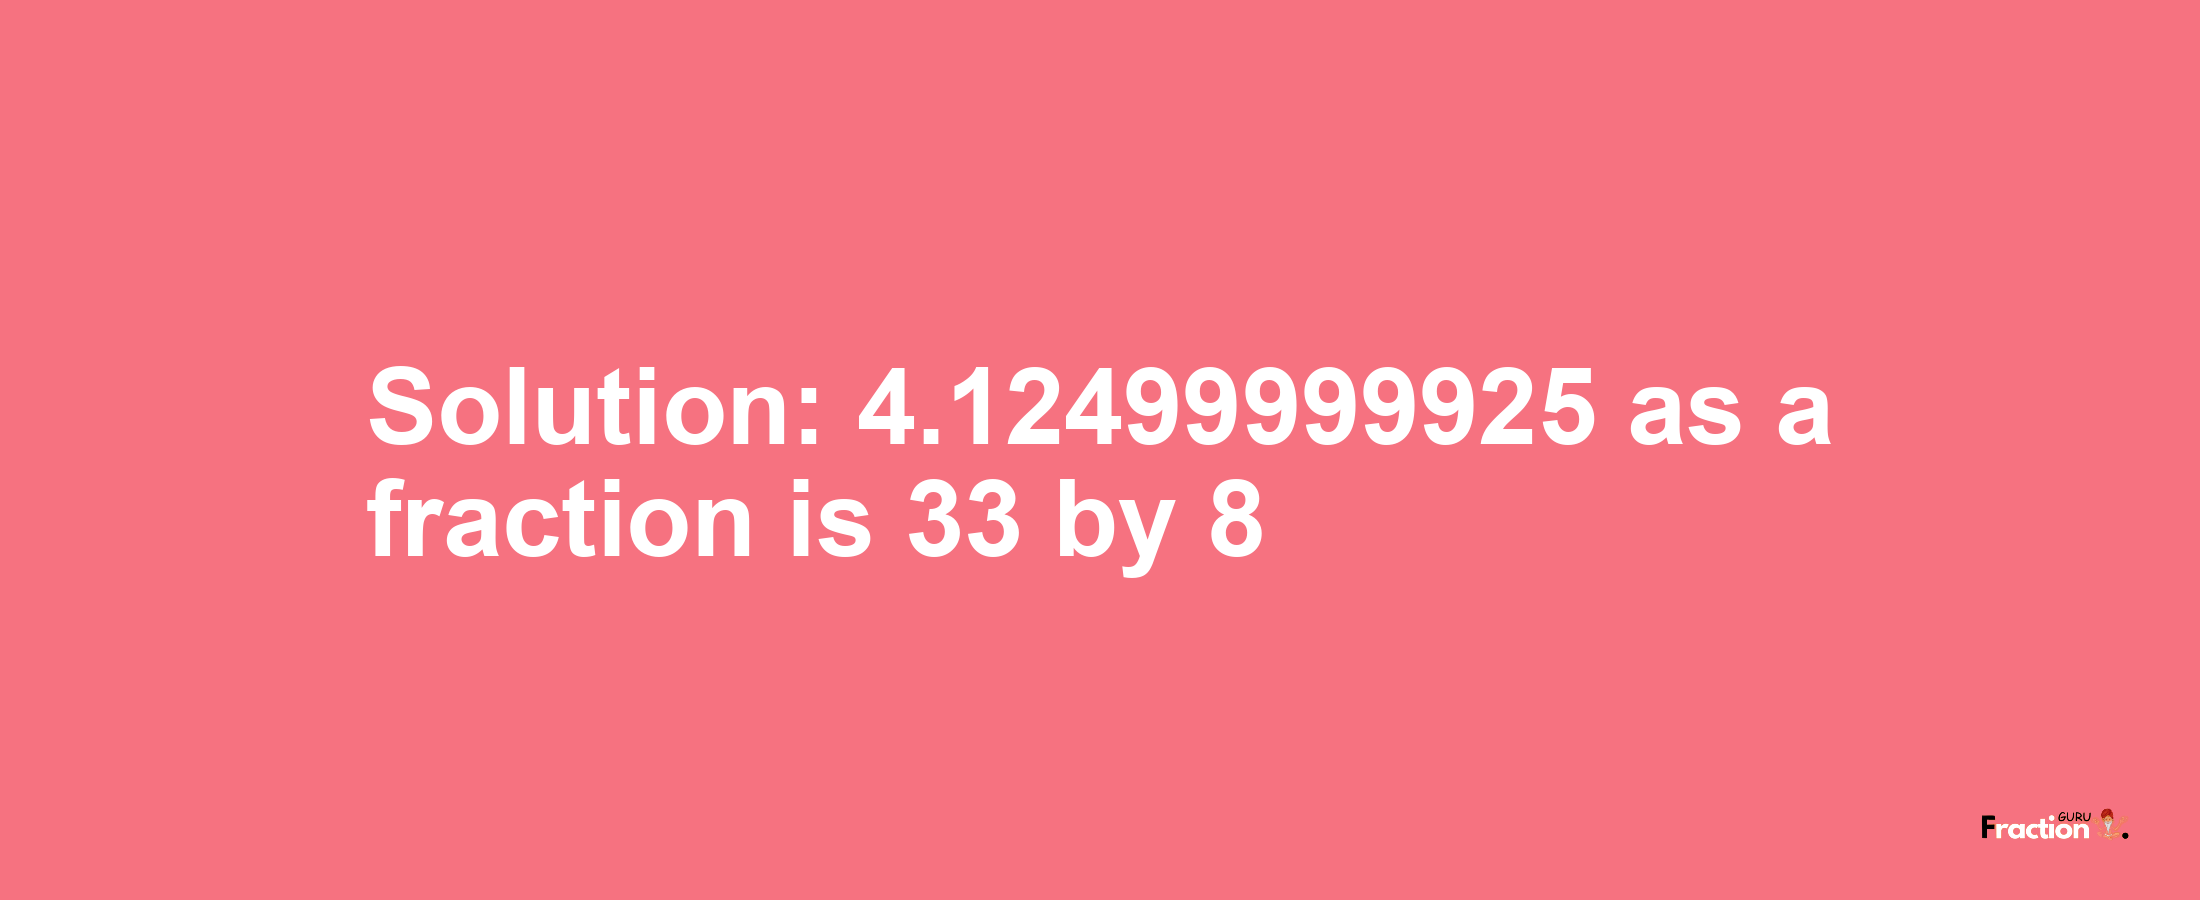 Solution:4.12499999925 as a fraction is 33/8